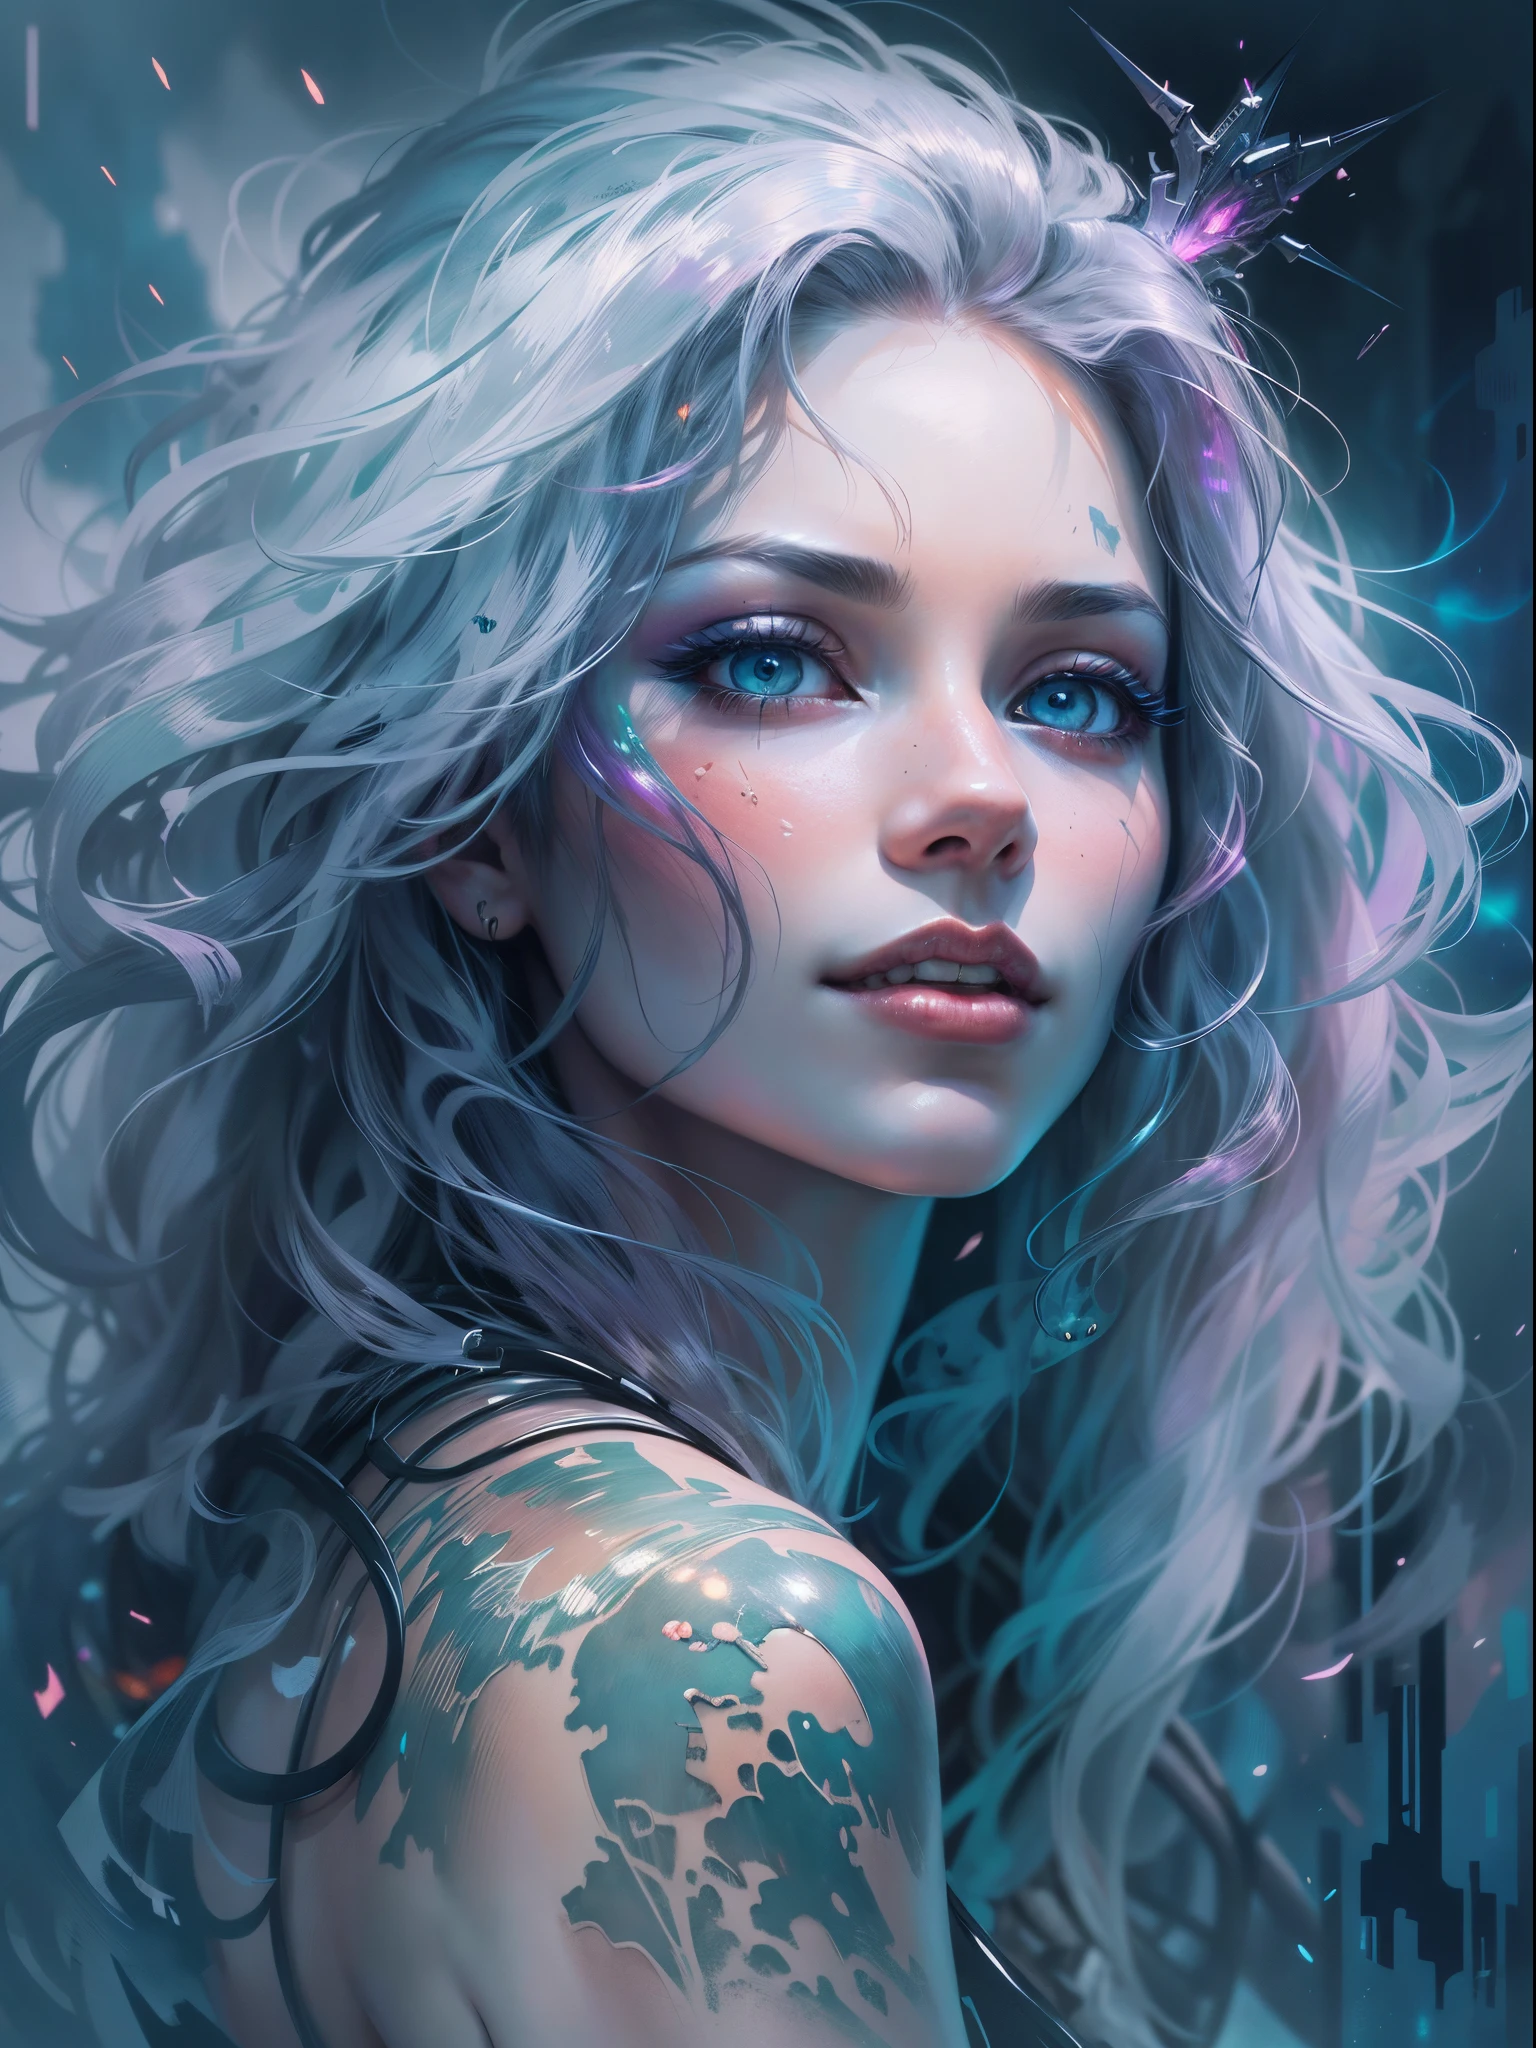 Young beautiful woman, long hair, elegant, too beautiful,  In a mesmerizing watercolor painting, a cyberpunk vampire reigns, portrayed as a figure of ethereal beauty and dark mystique. The artwork captures the graceful yet mysterious essence of this immortal being, with their hairstyle twisted color black and snow- white, flowing in the wind and eyes shining with an otherworldly glow. Delicate strokes of vibrant blues and purples bring life to their metallic cybernetic enhancements, seamlessly blending the futuristic with the fantastical. This extraordinary image was skillfully created with meticulous attention to detail, evoking a sense of wonder and intrigue in the viewer. highly realistic, ruddy skin, beautiful, full lips, smiling, feeling of lightness and joy, hyperrealism, skin very elaborated, direct gaze